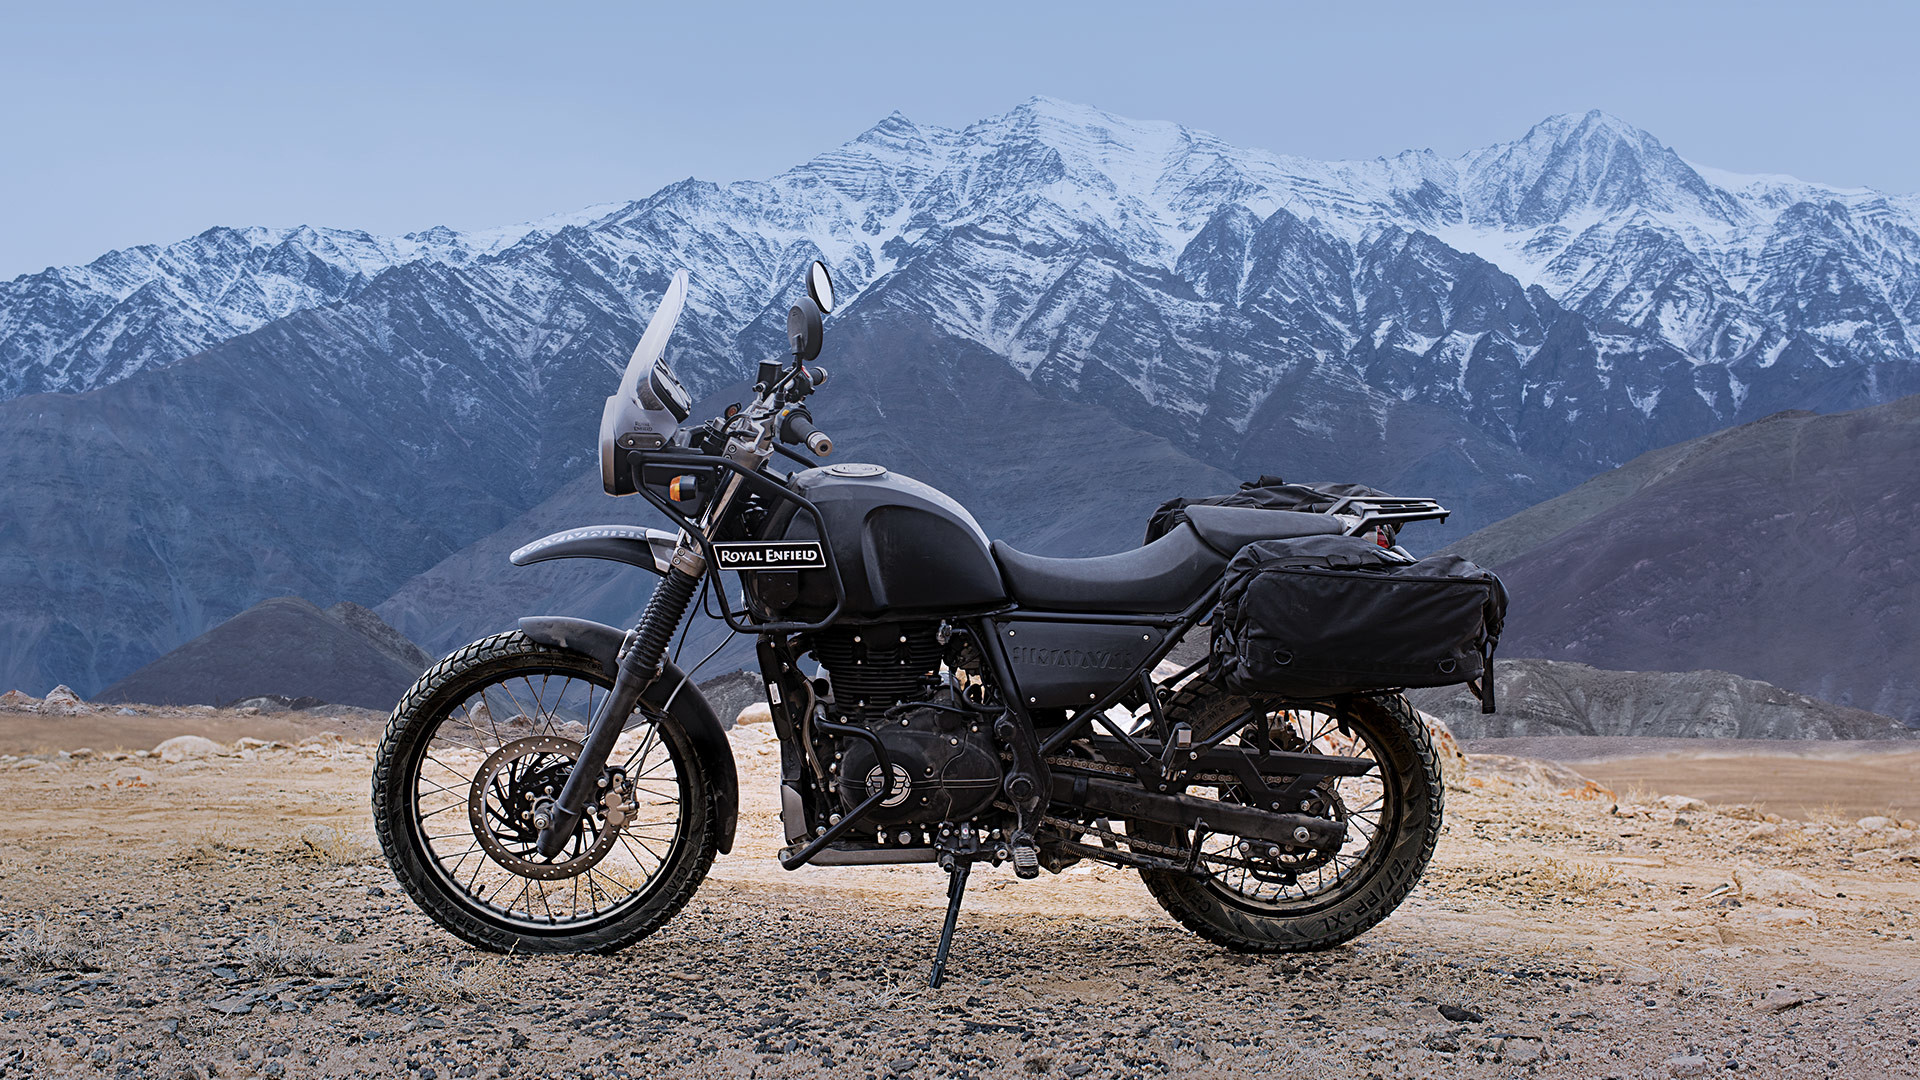 1920x1080 Royal Enfield Himalayan Motorcycle Technical Specification, Mileage, Colours